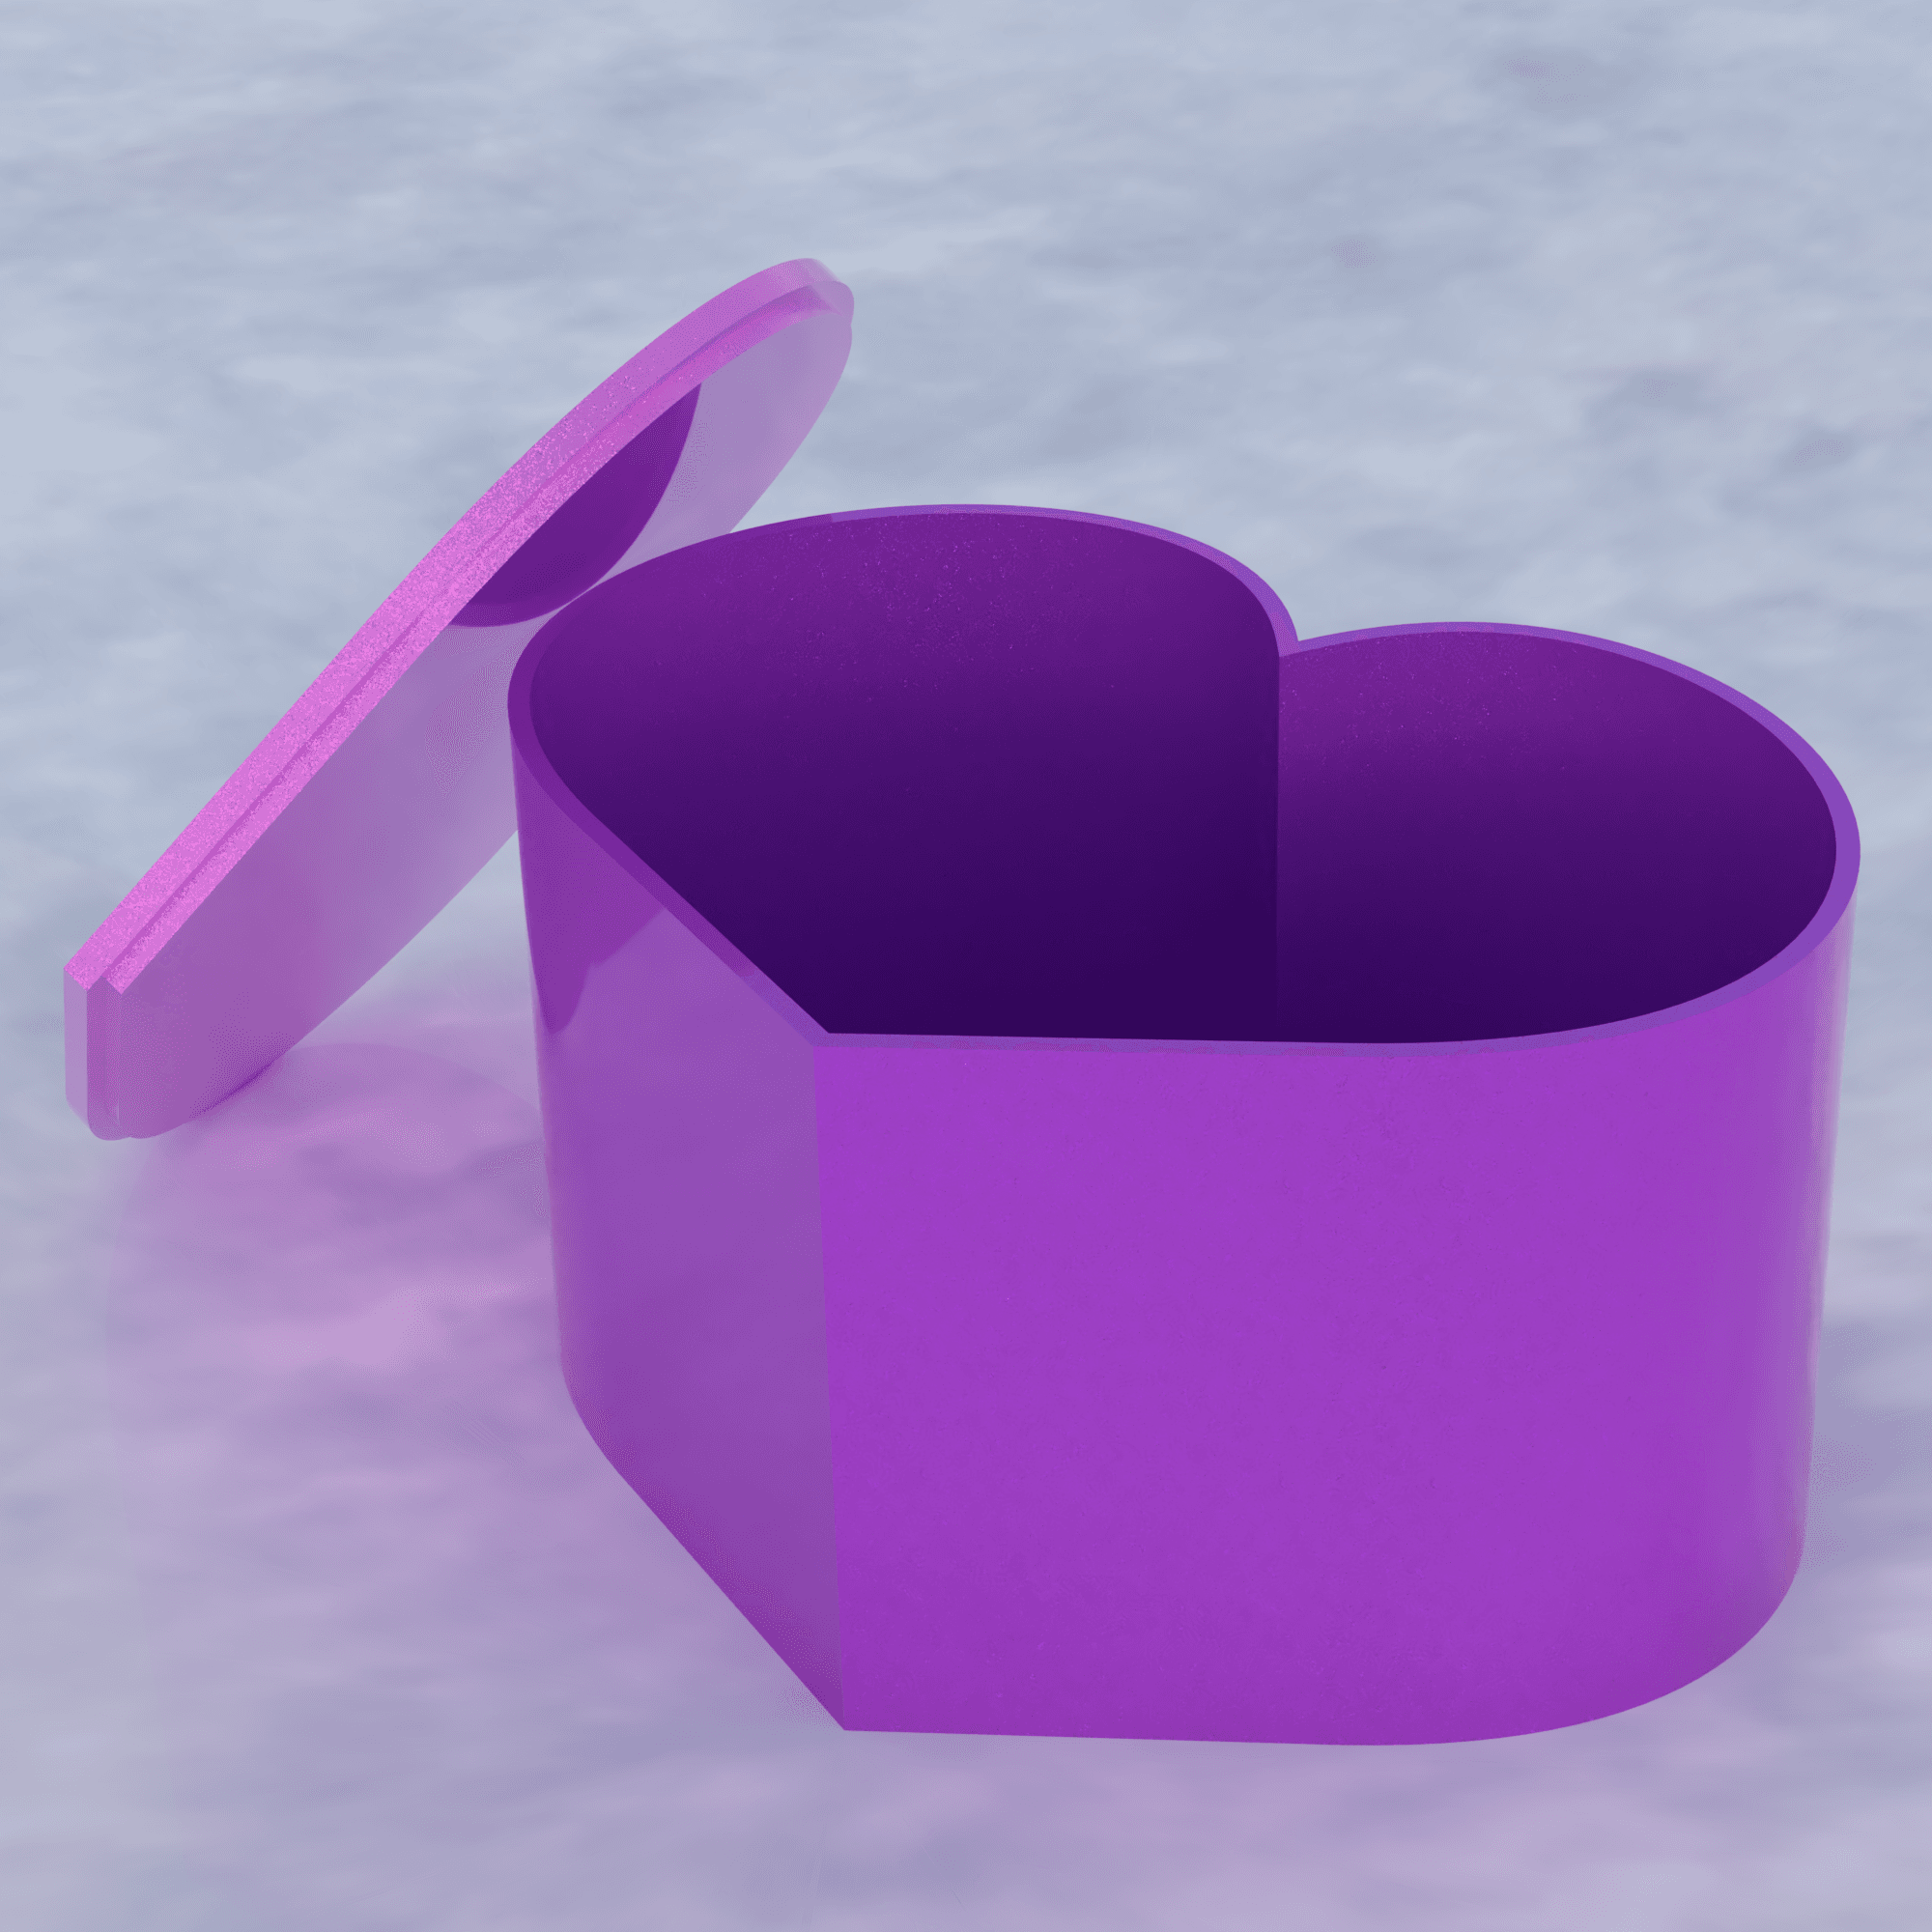 Heart-shaped box with lid for Valentine's 3d model